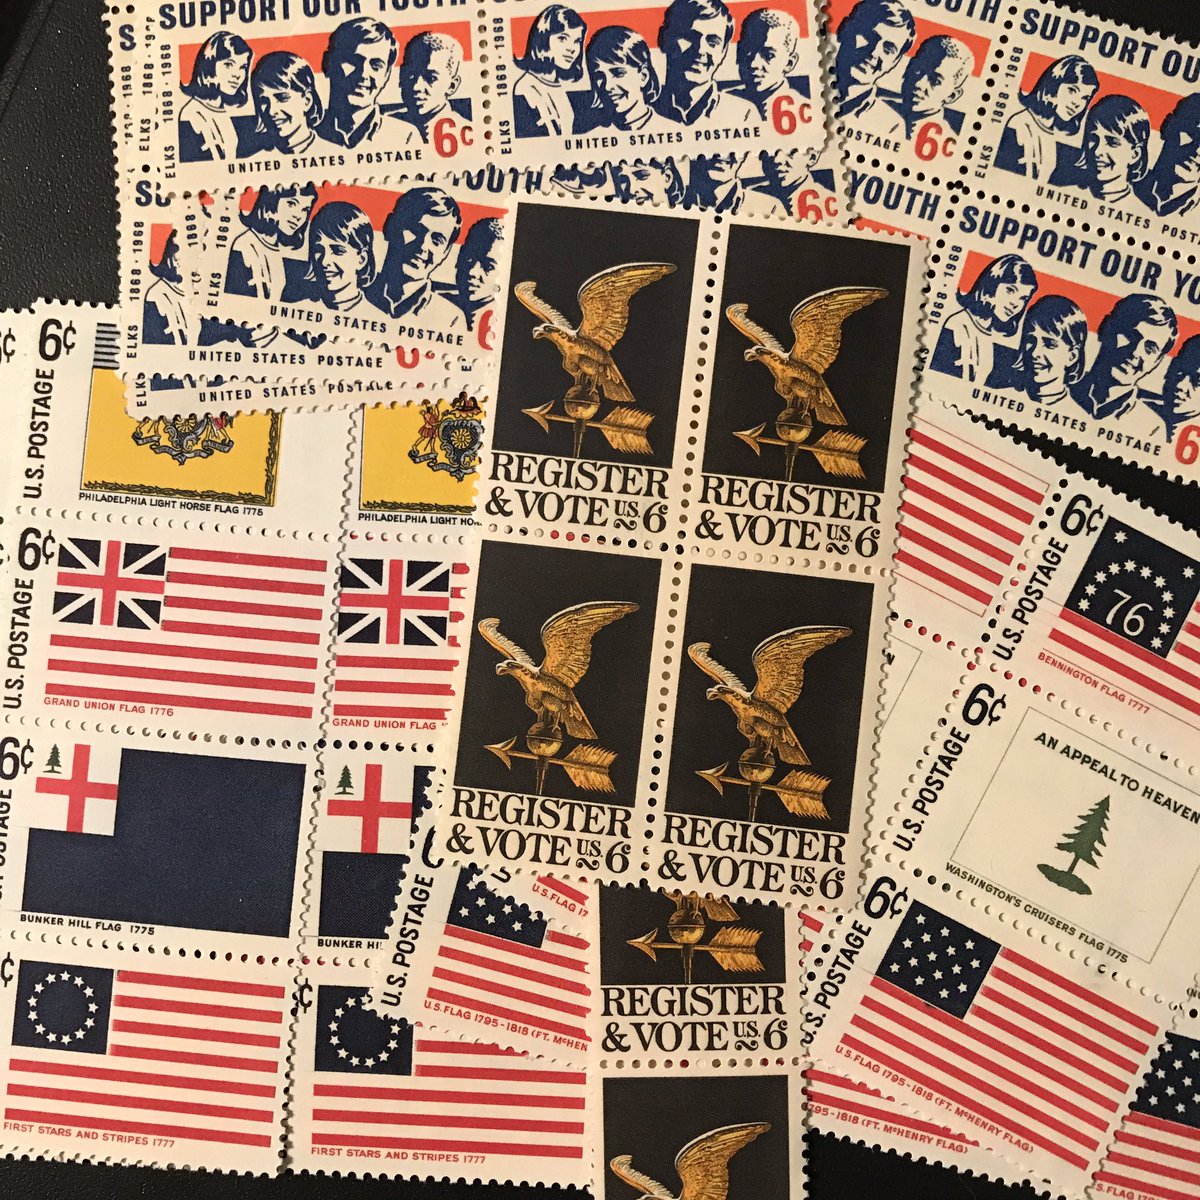 @drb4au @emyryly My latest order of vintage stamps came yesterday. It’s always fun to see what they feature! #PostcardsToVoters #VintageStamps